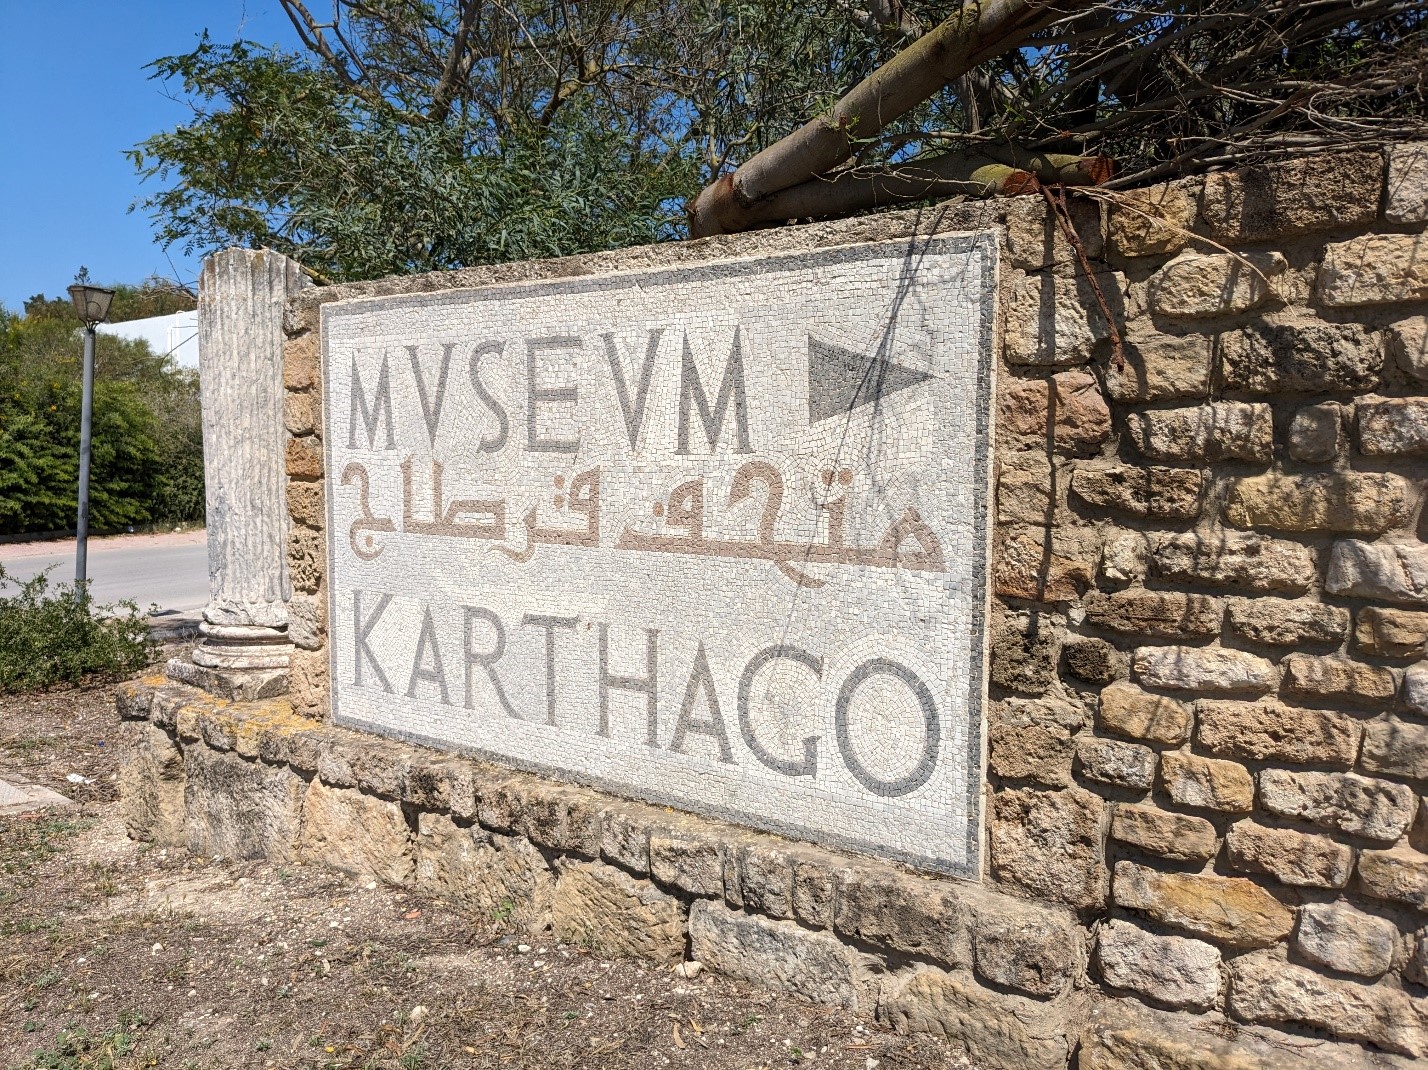 The mosaic sign at the base of the driveway to the Carthage National Museum (photo by H. Dixon).